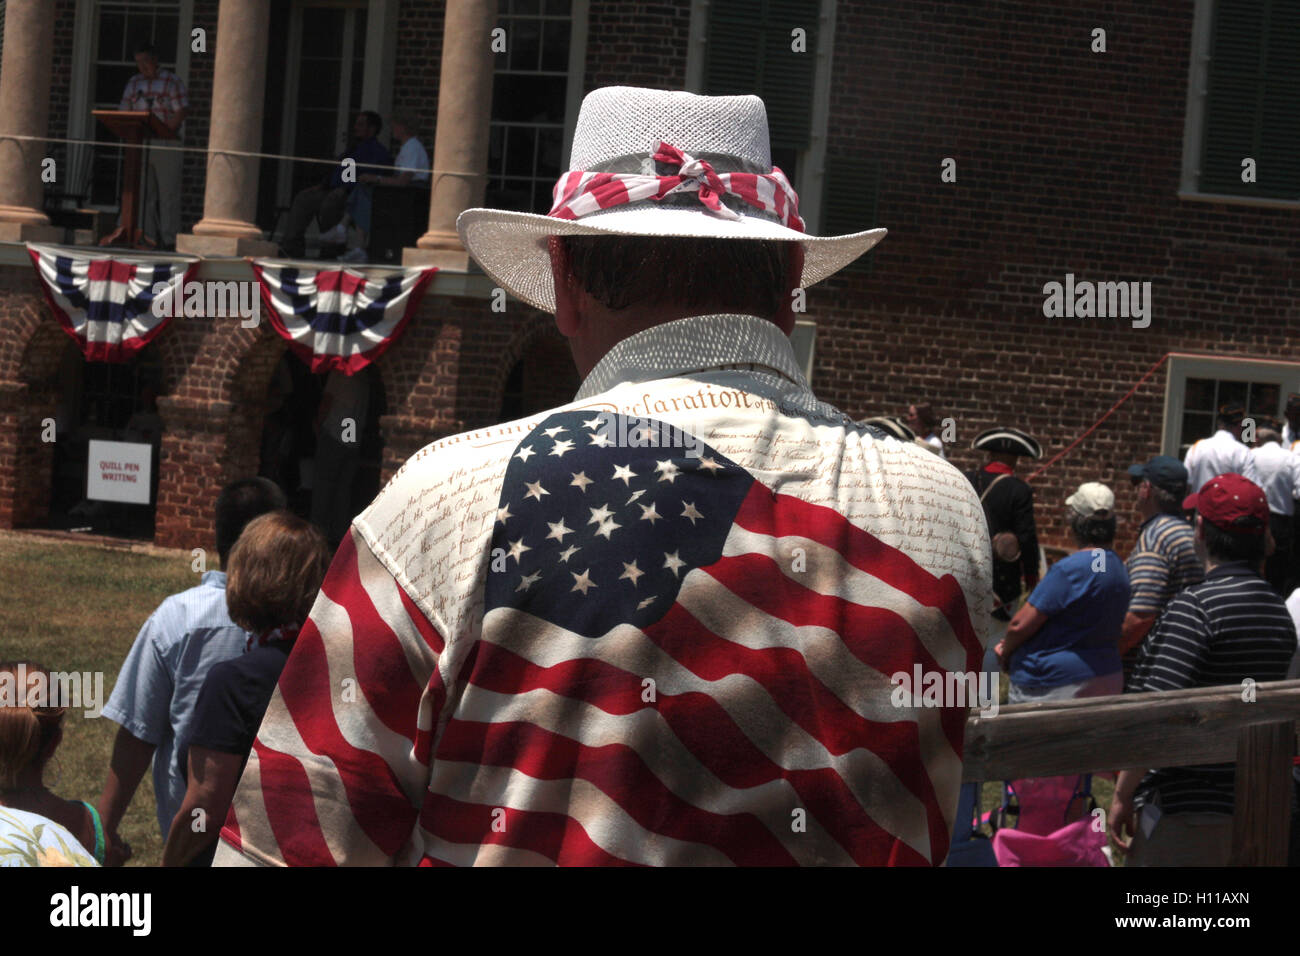 Man in patriotic clothing at a 4th of July event at Thomas Jefferson's Poplar Forest retreat in Forest, Virginia, USA Stock Photo